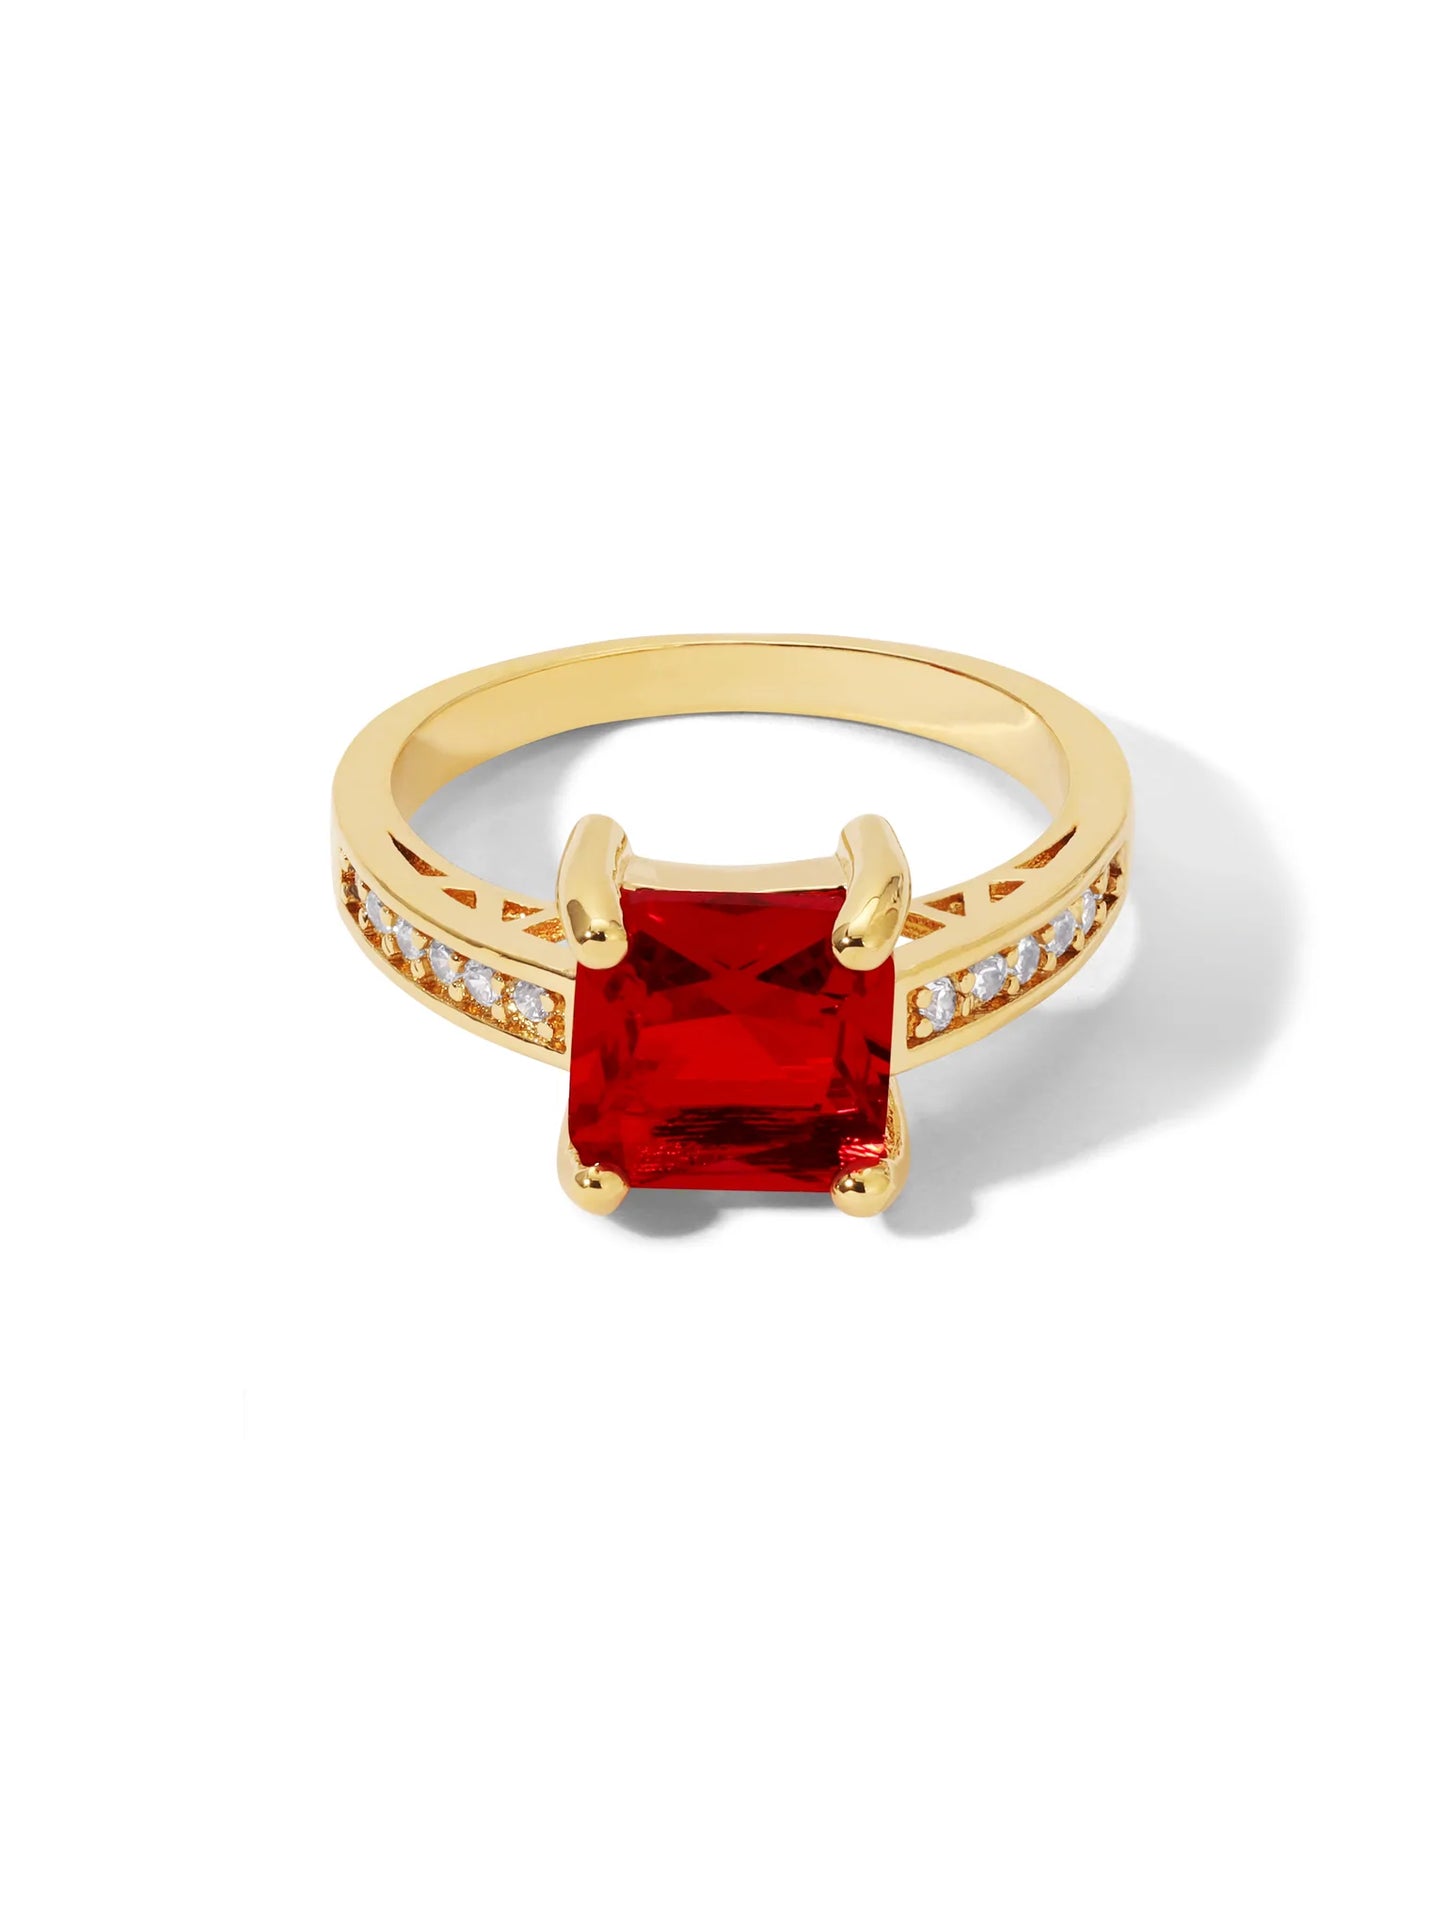 The Future Ring - Ruby